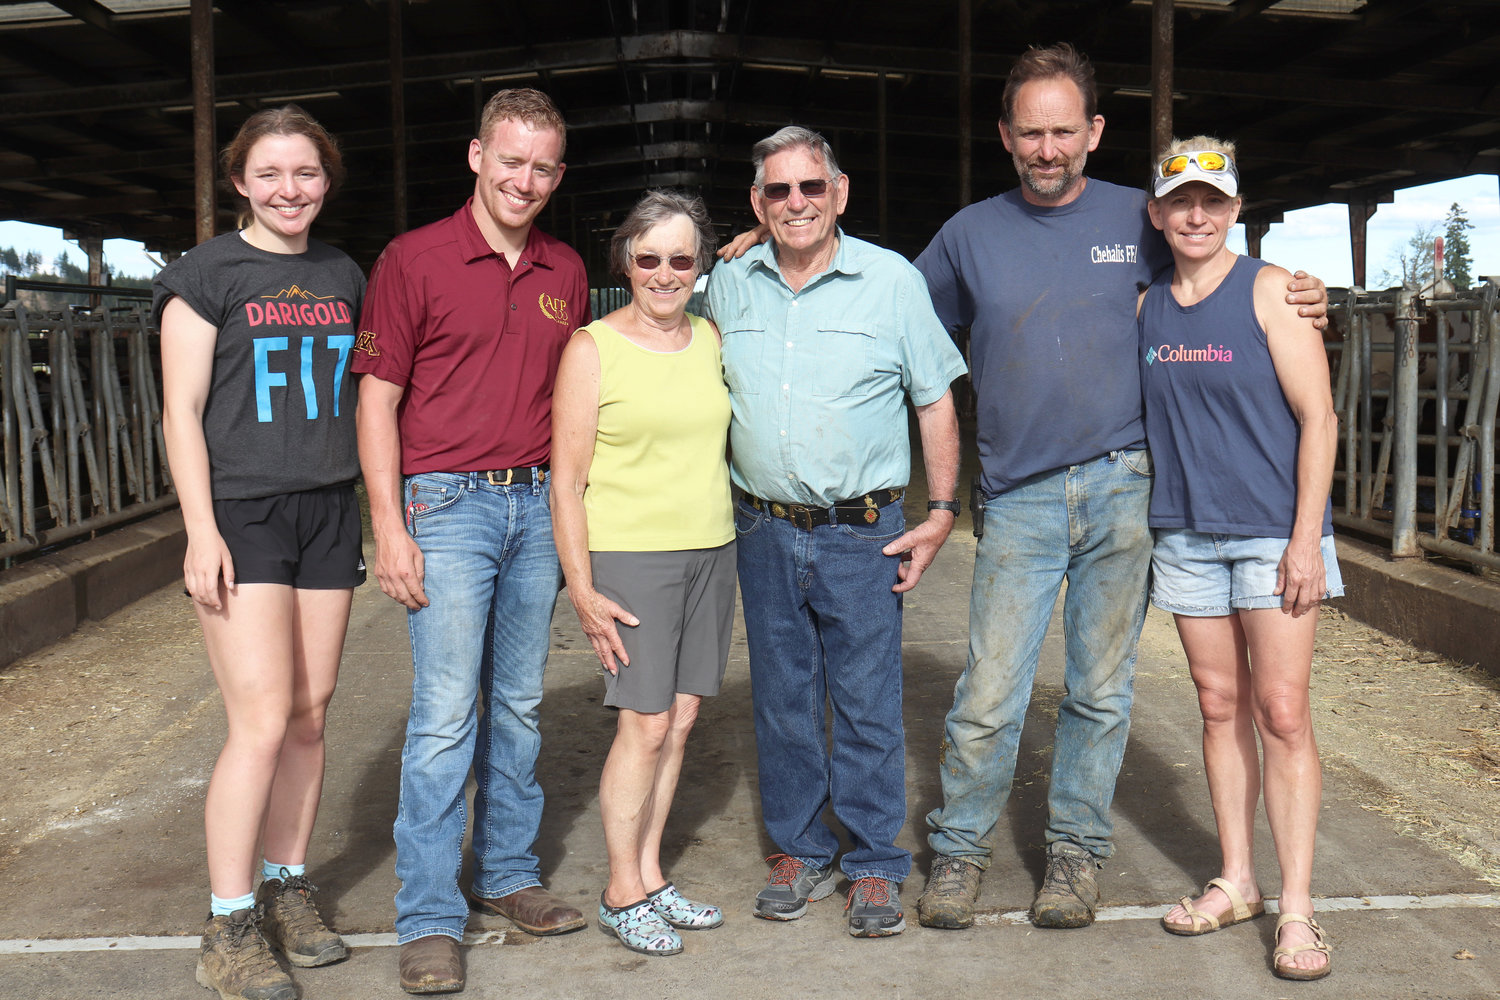 Sun-Ton Farms owners and operators, from left, Cassy, Zach, Sunny, Tony, Lonny and Michelle Schilter, pose for a photo in front of their barn during an open house in Adna on Friday.